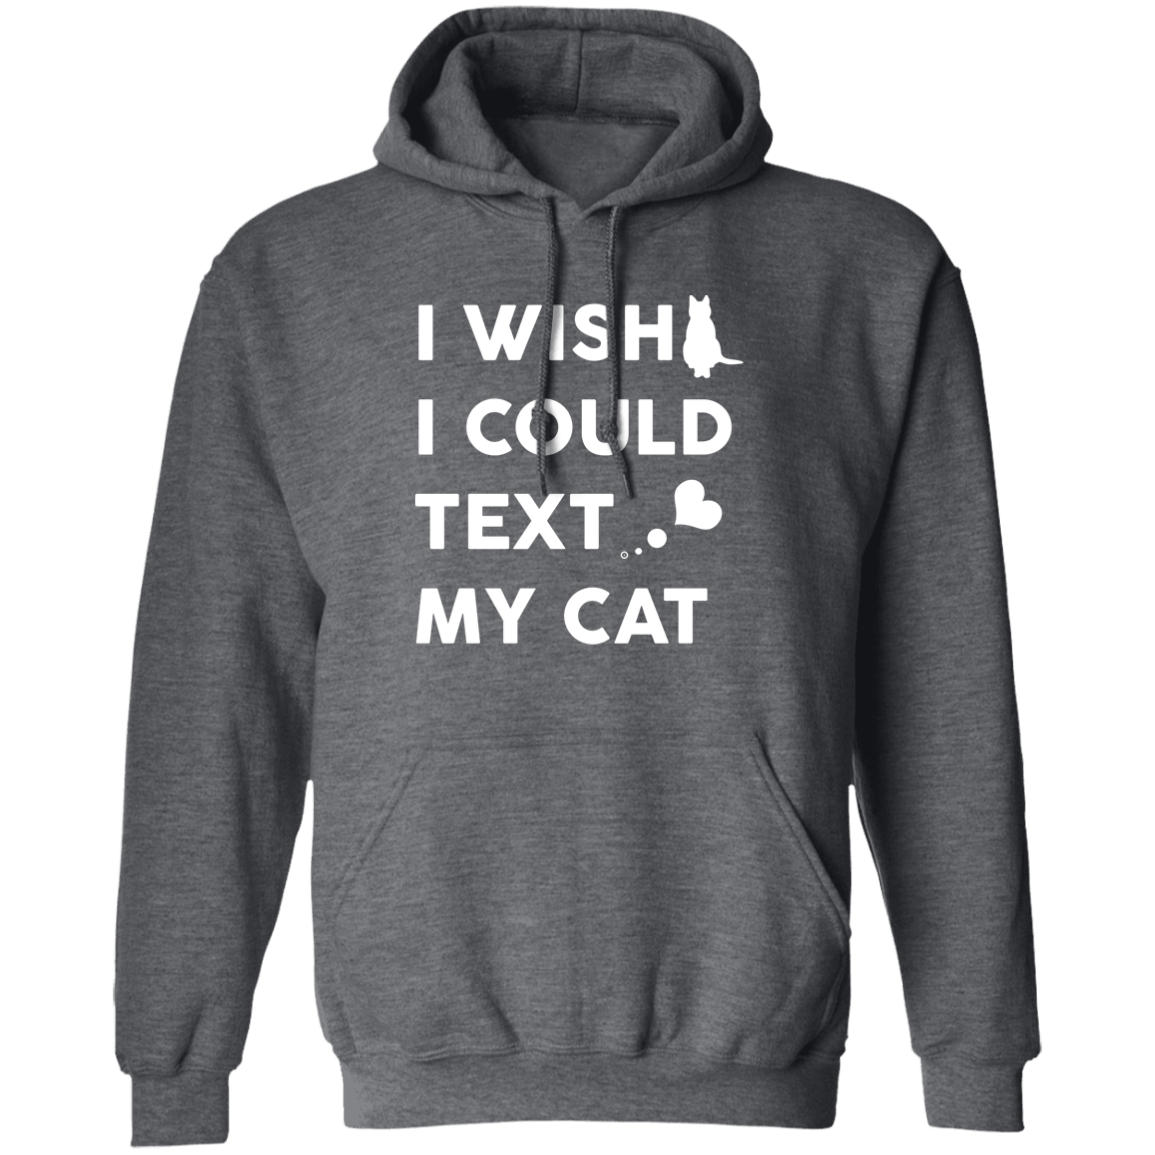 I Wish I Could Text My Cat - Hoodie.